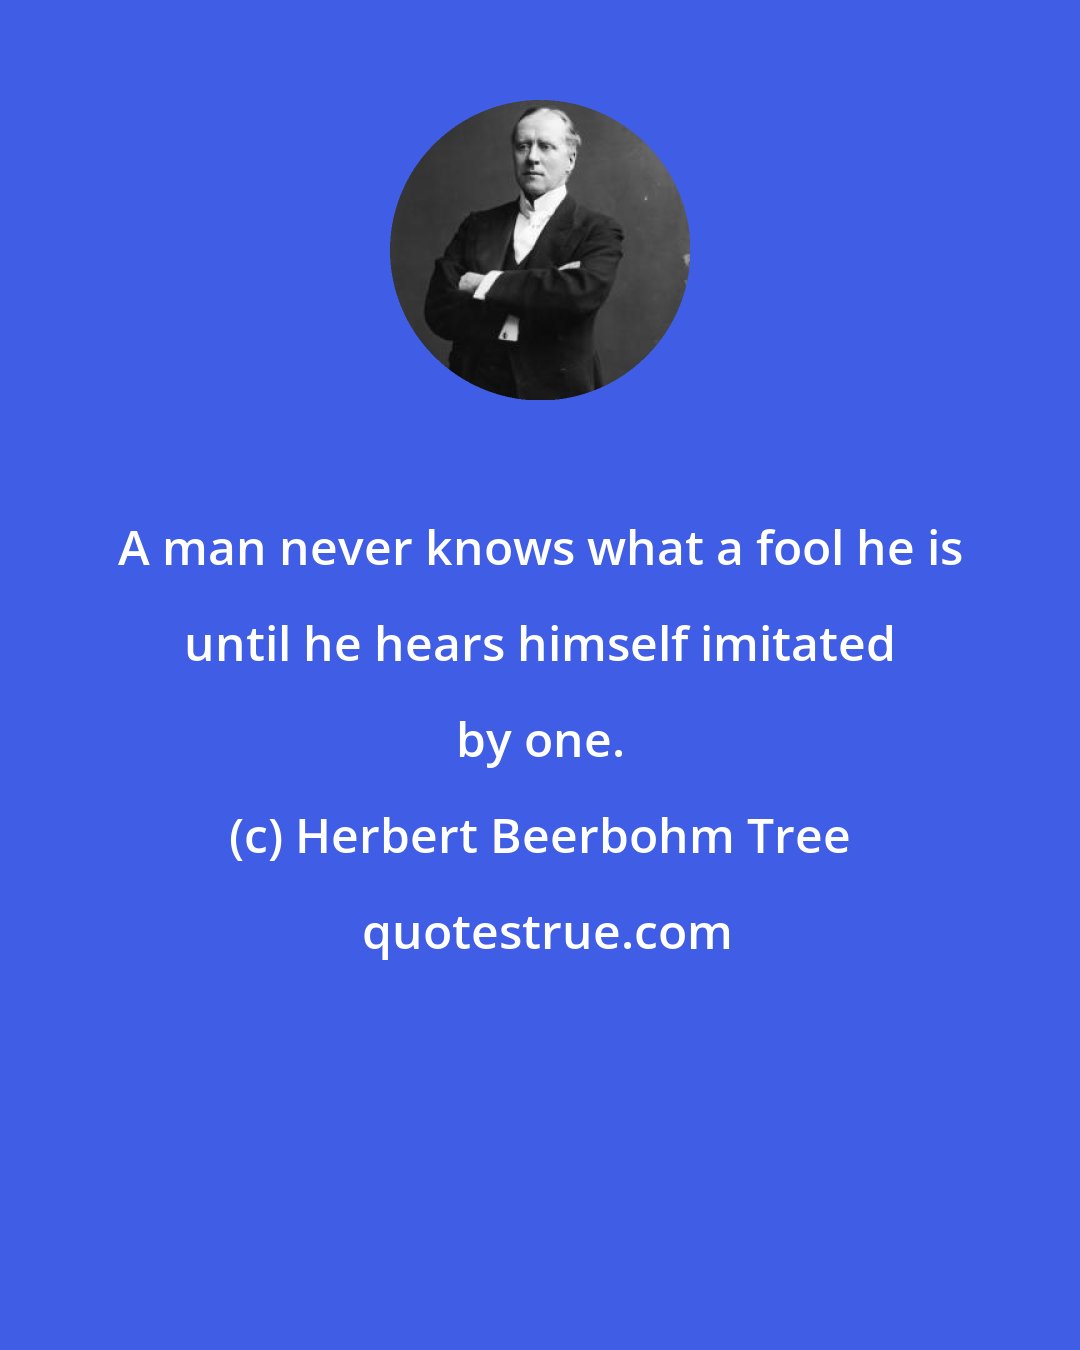 Herbert Beerbohm Tree: A man never knows what a fool he is until he hears himself imitated by one.